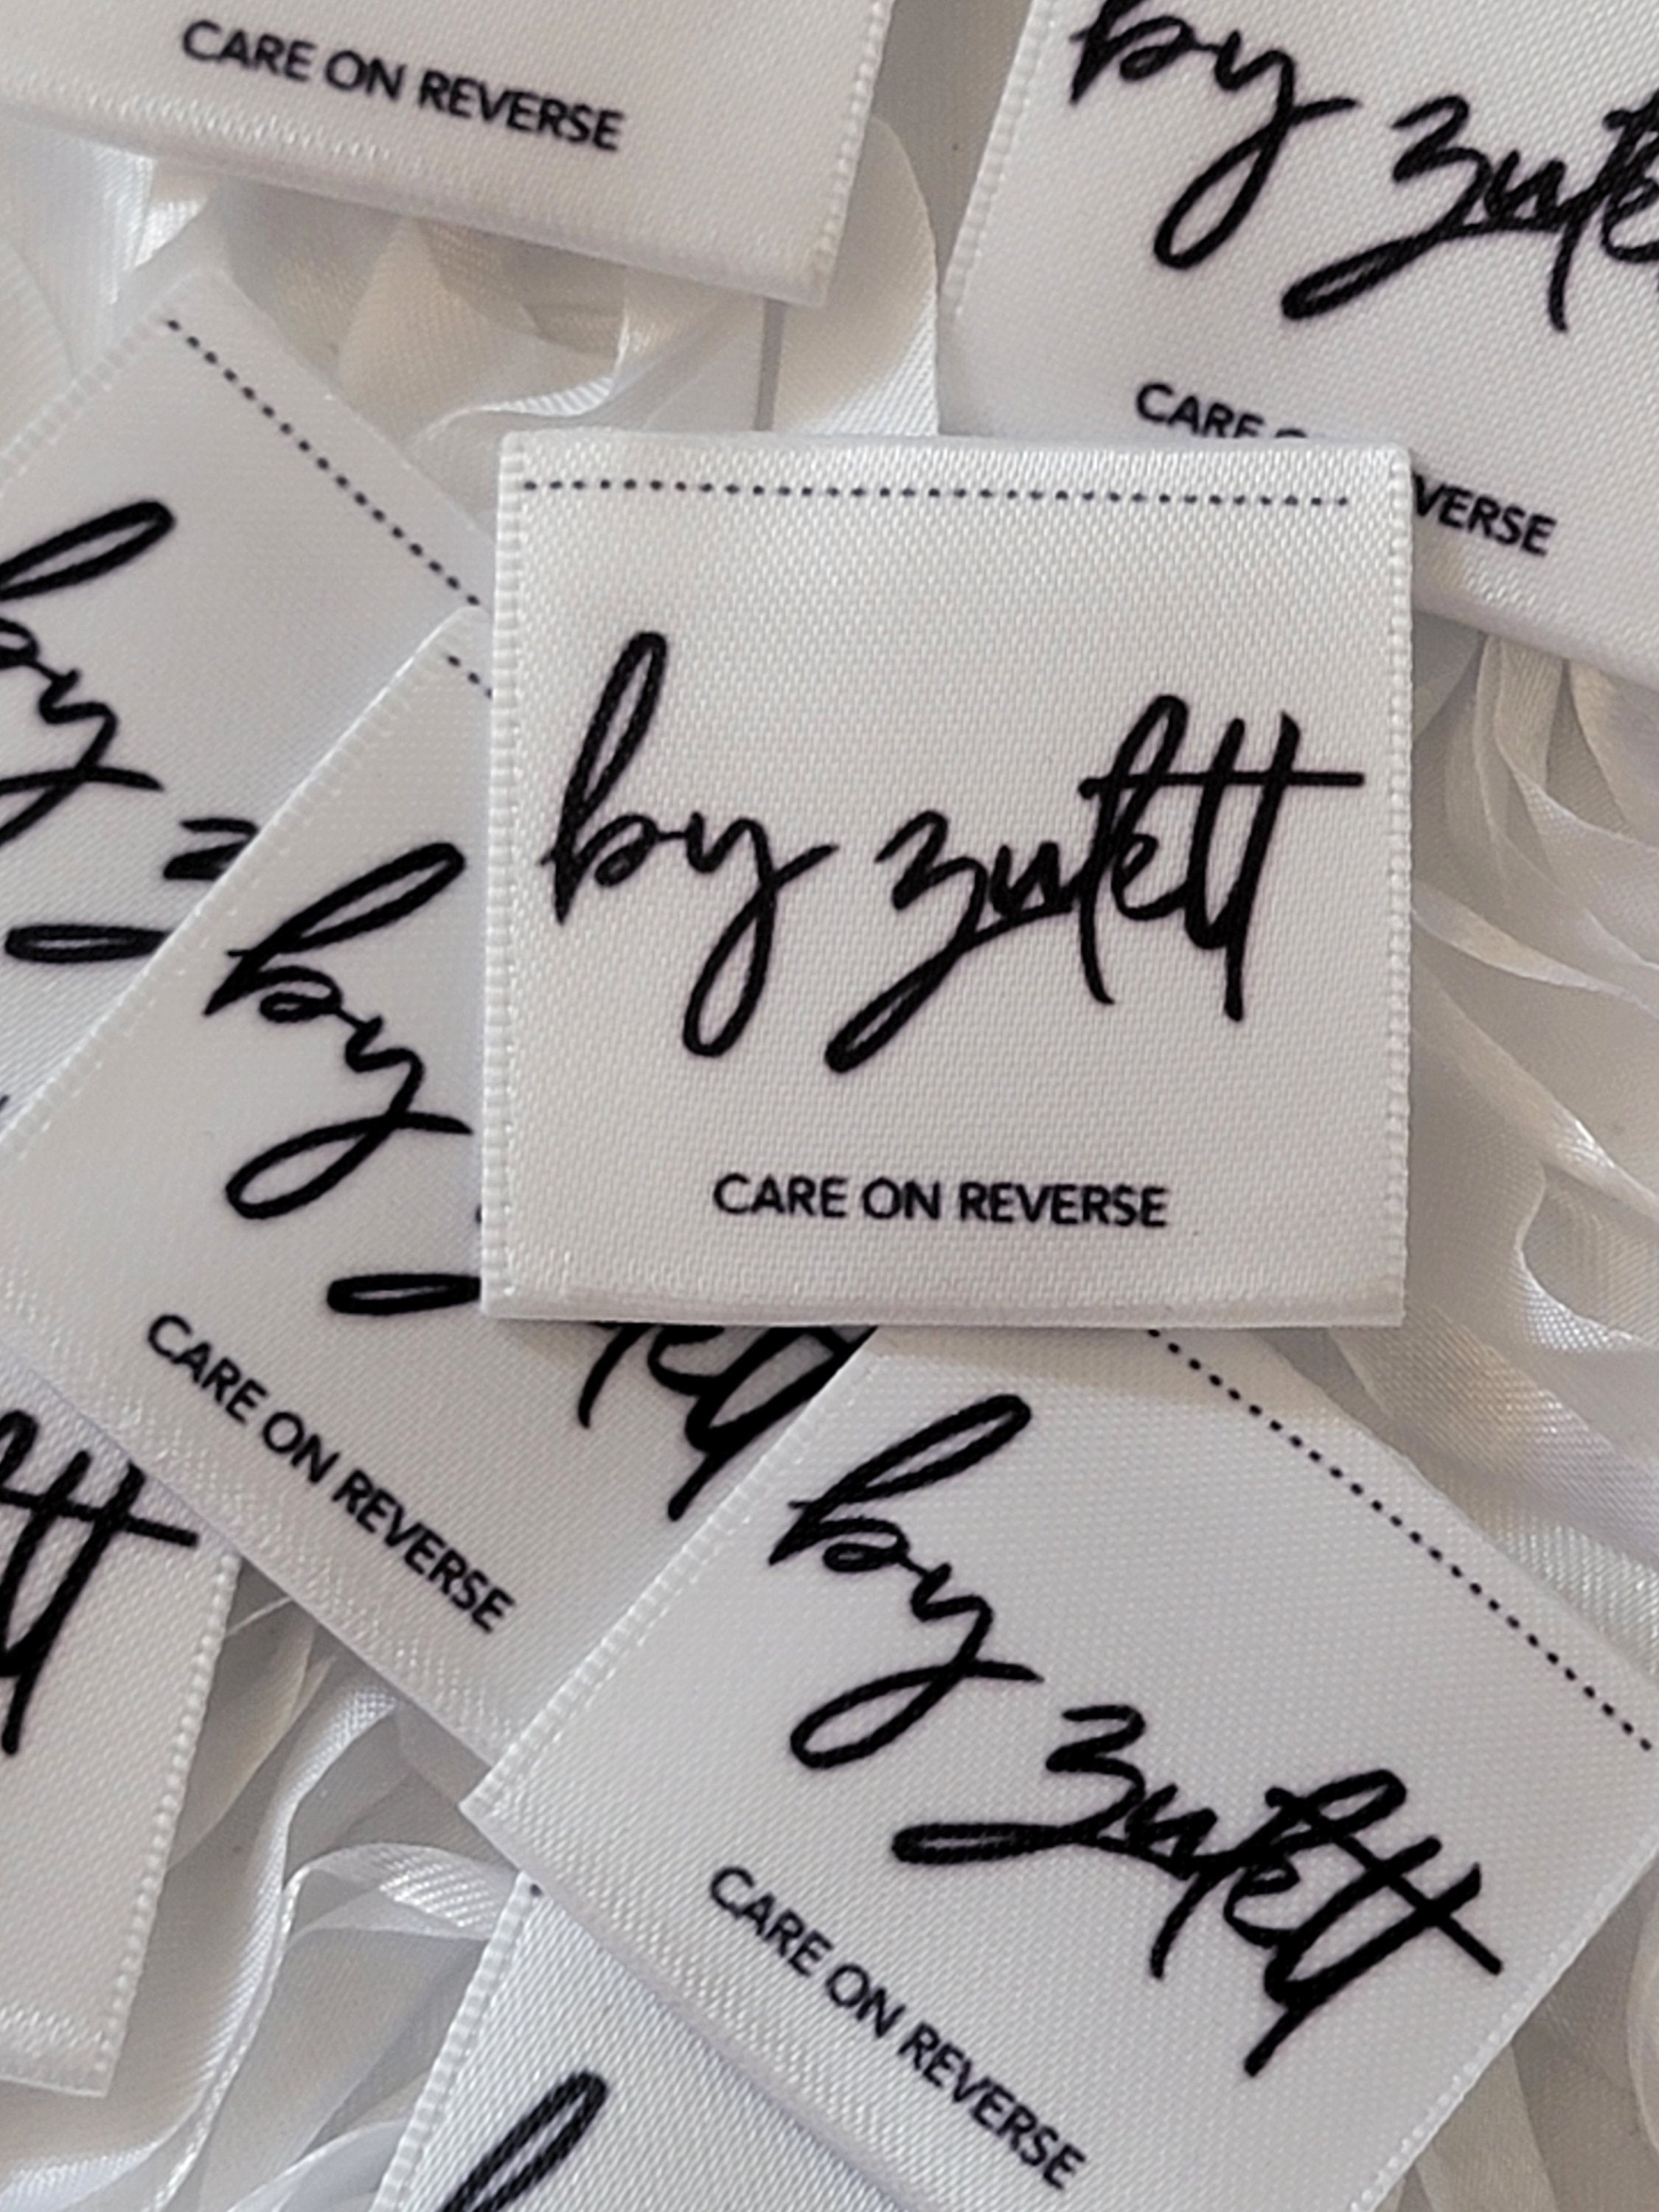 Custom Clothing Labels White Cotton Sew on or Iron on 